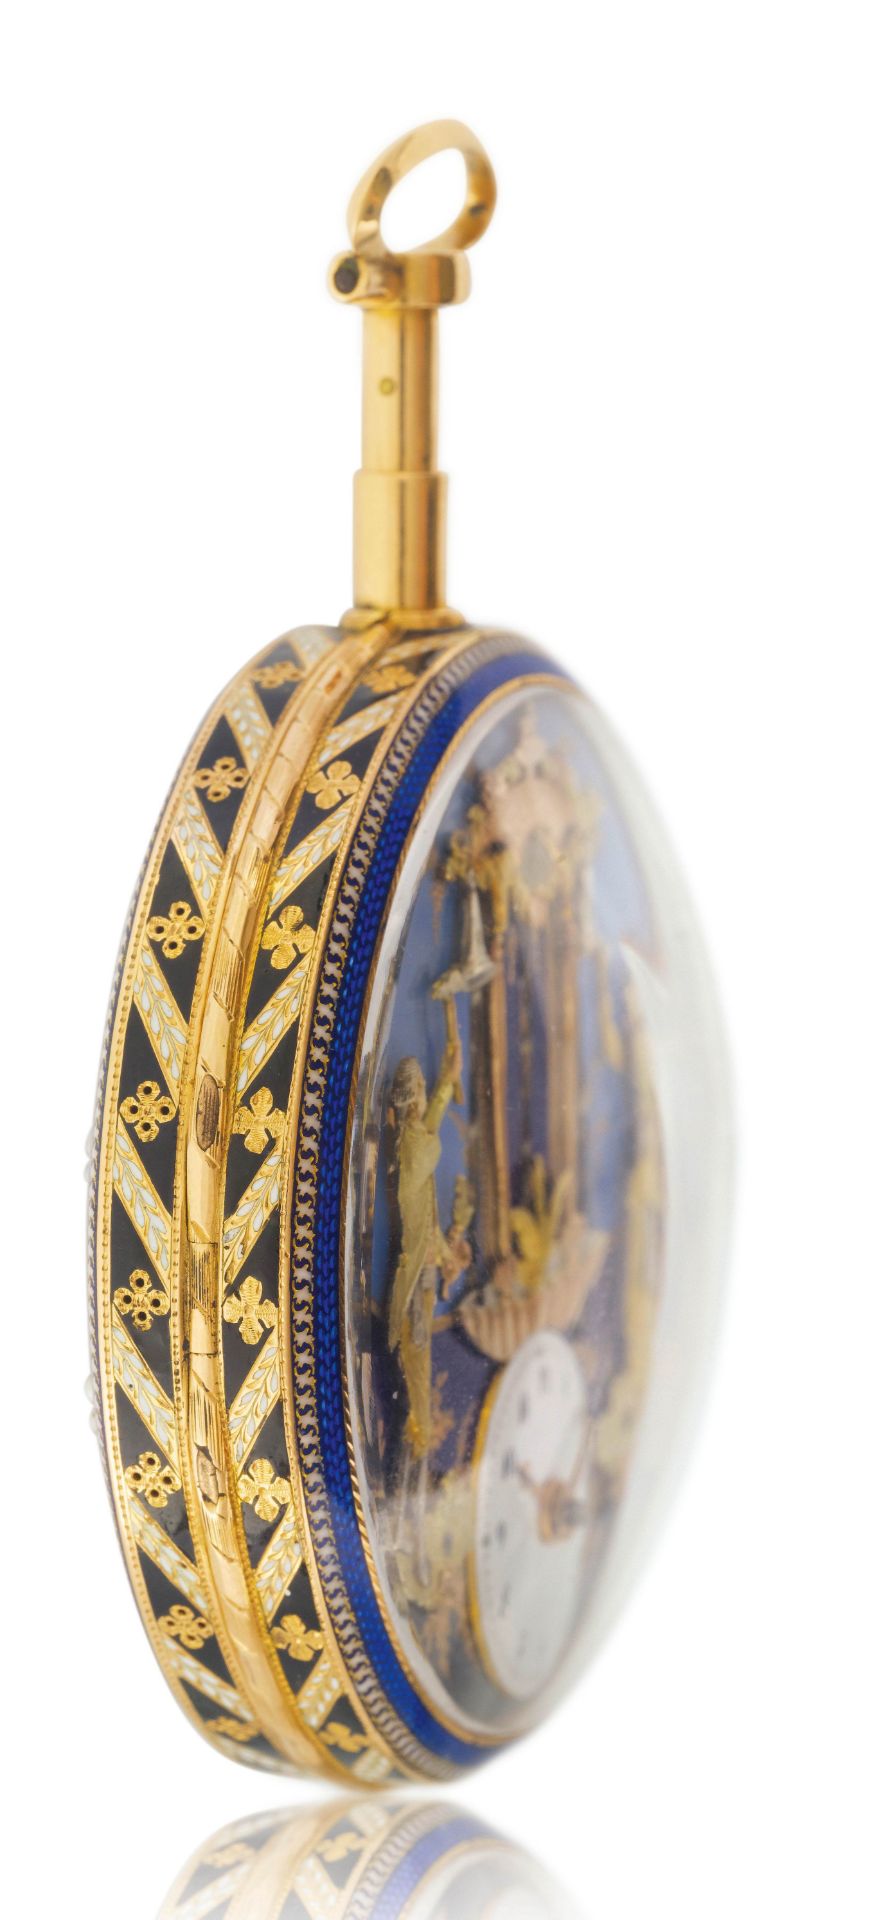 Veigneur Frères, extremely rare and large gold enamel pocket watch with 1/4-repeater and automation, - Image 4 of 4